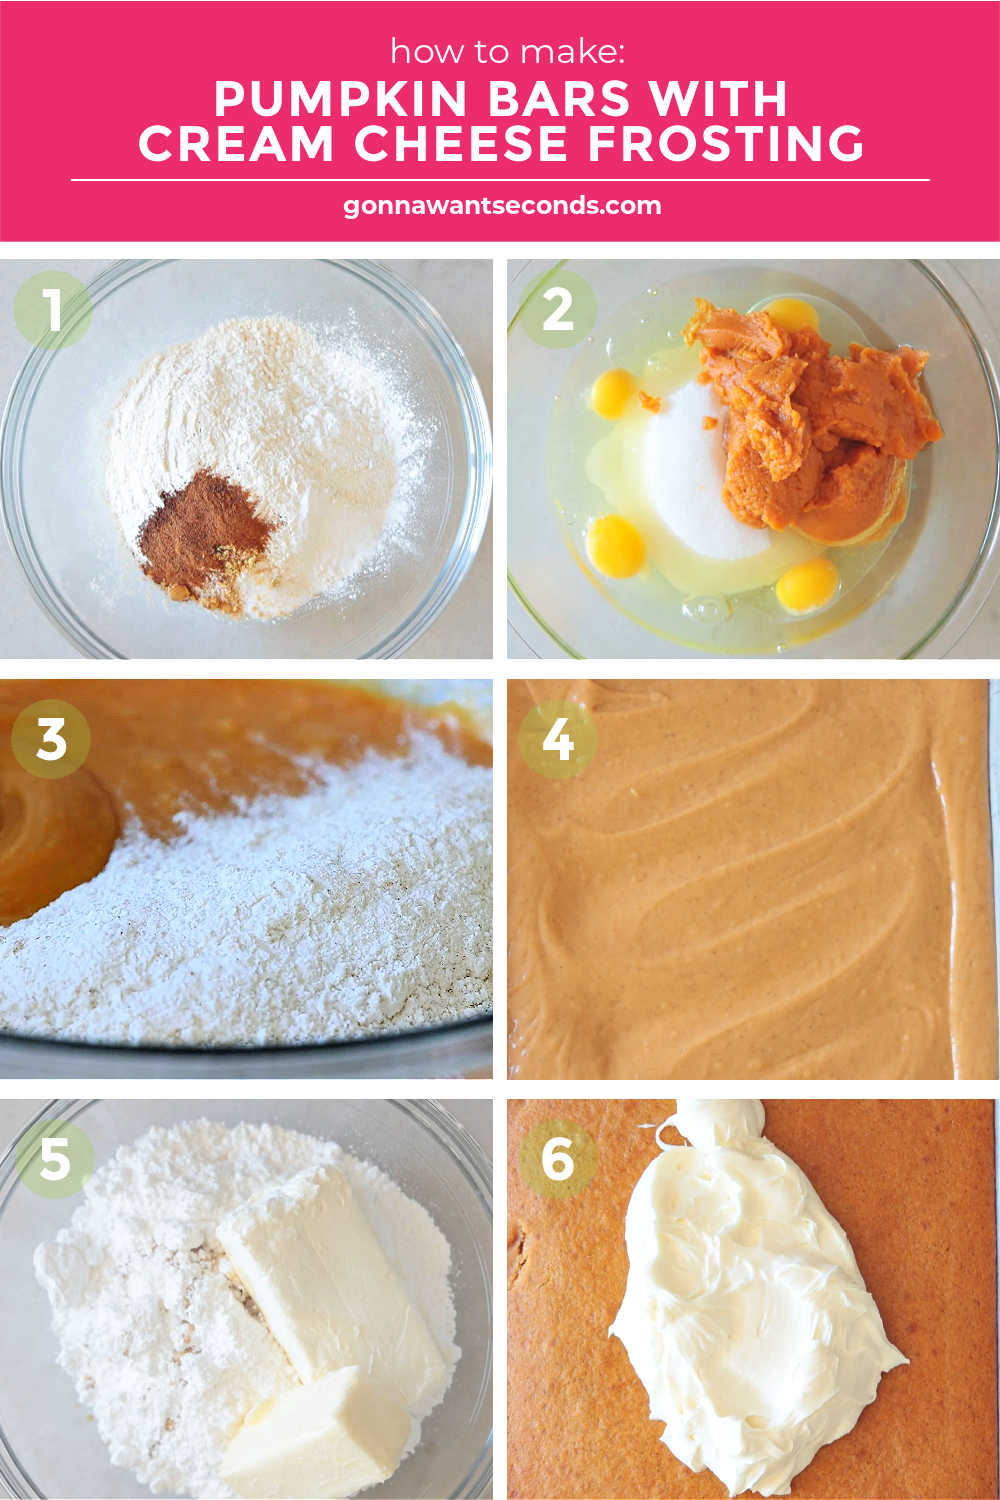 Step by step how to make recipe for Pumpkin Bars with Cream Cheese Frosting